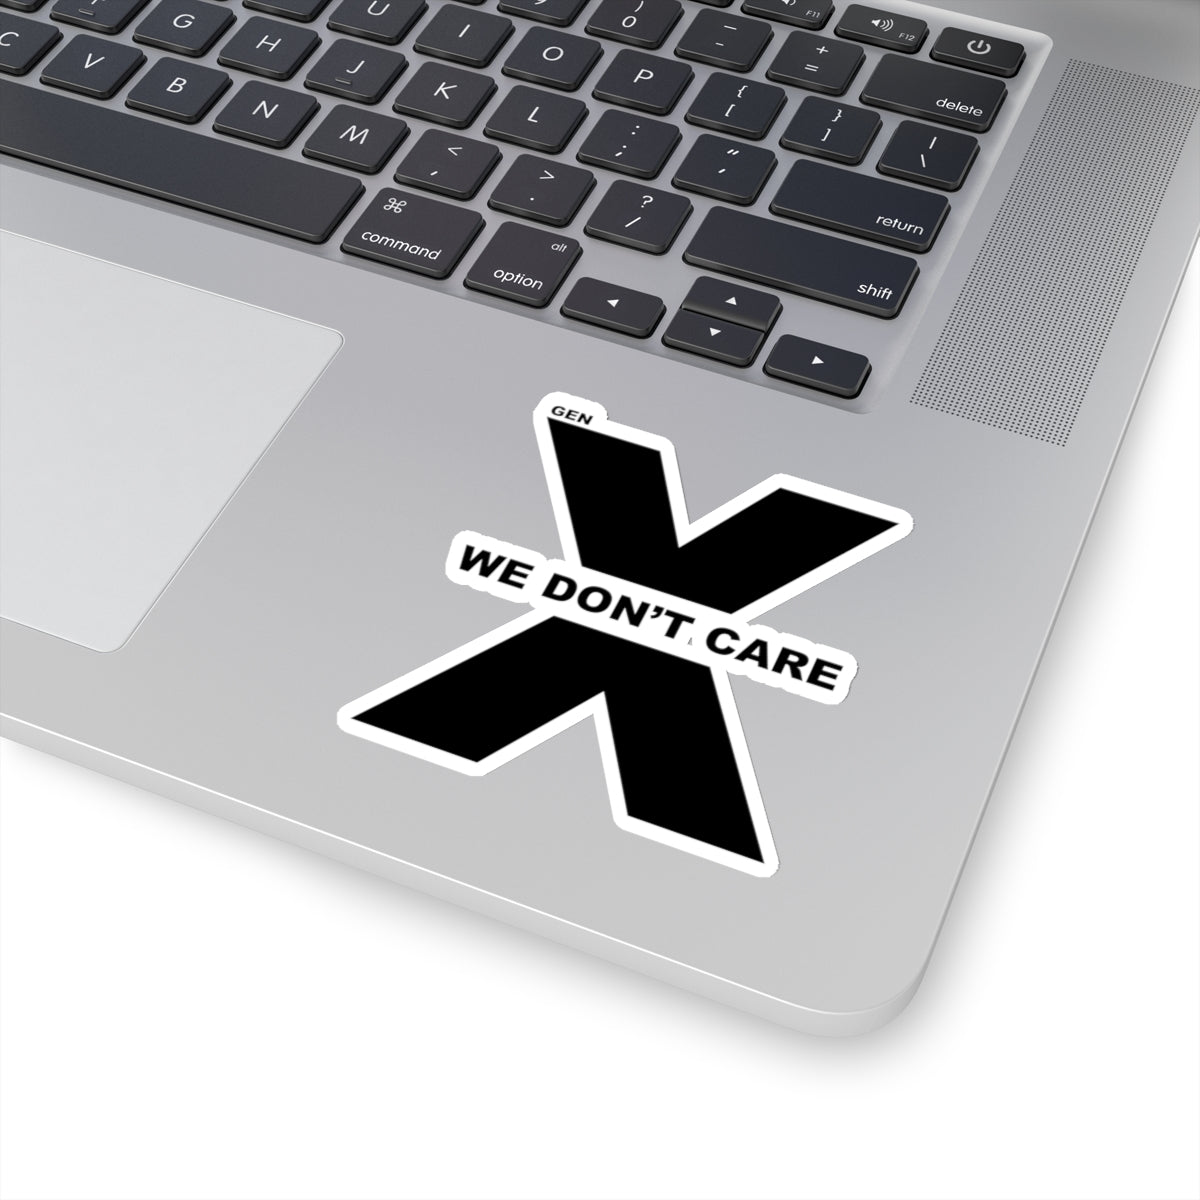 Gen X -We Don't Care -3x3" Sticker By Generation Mood